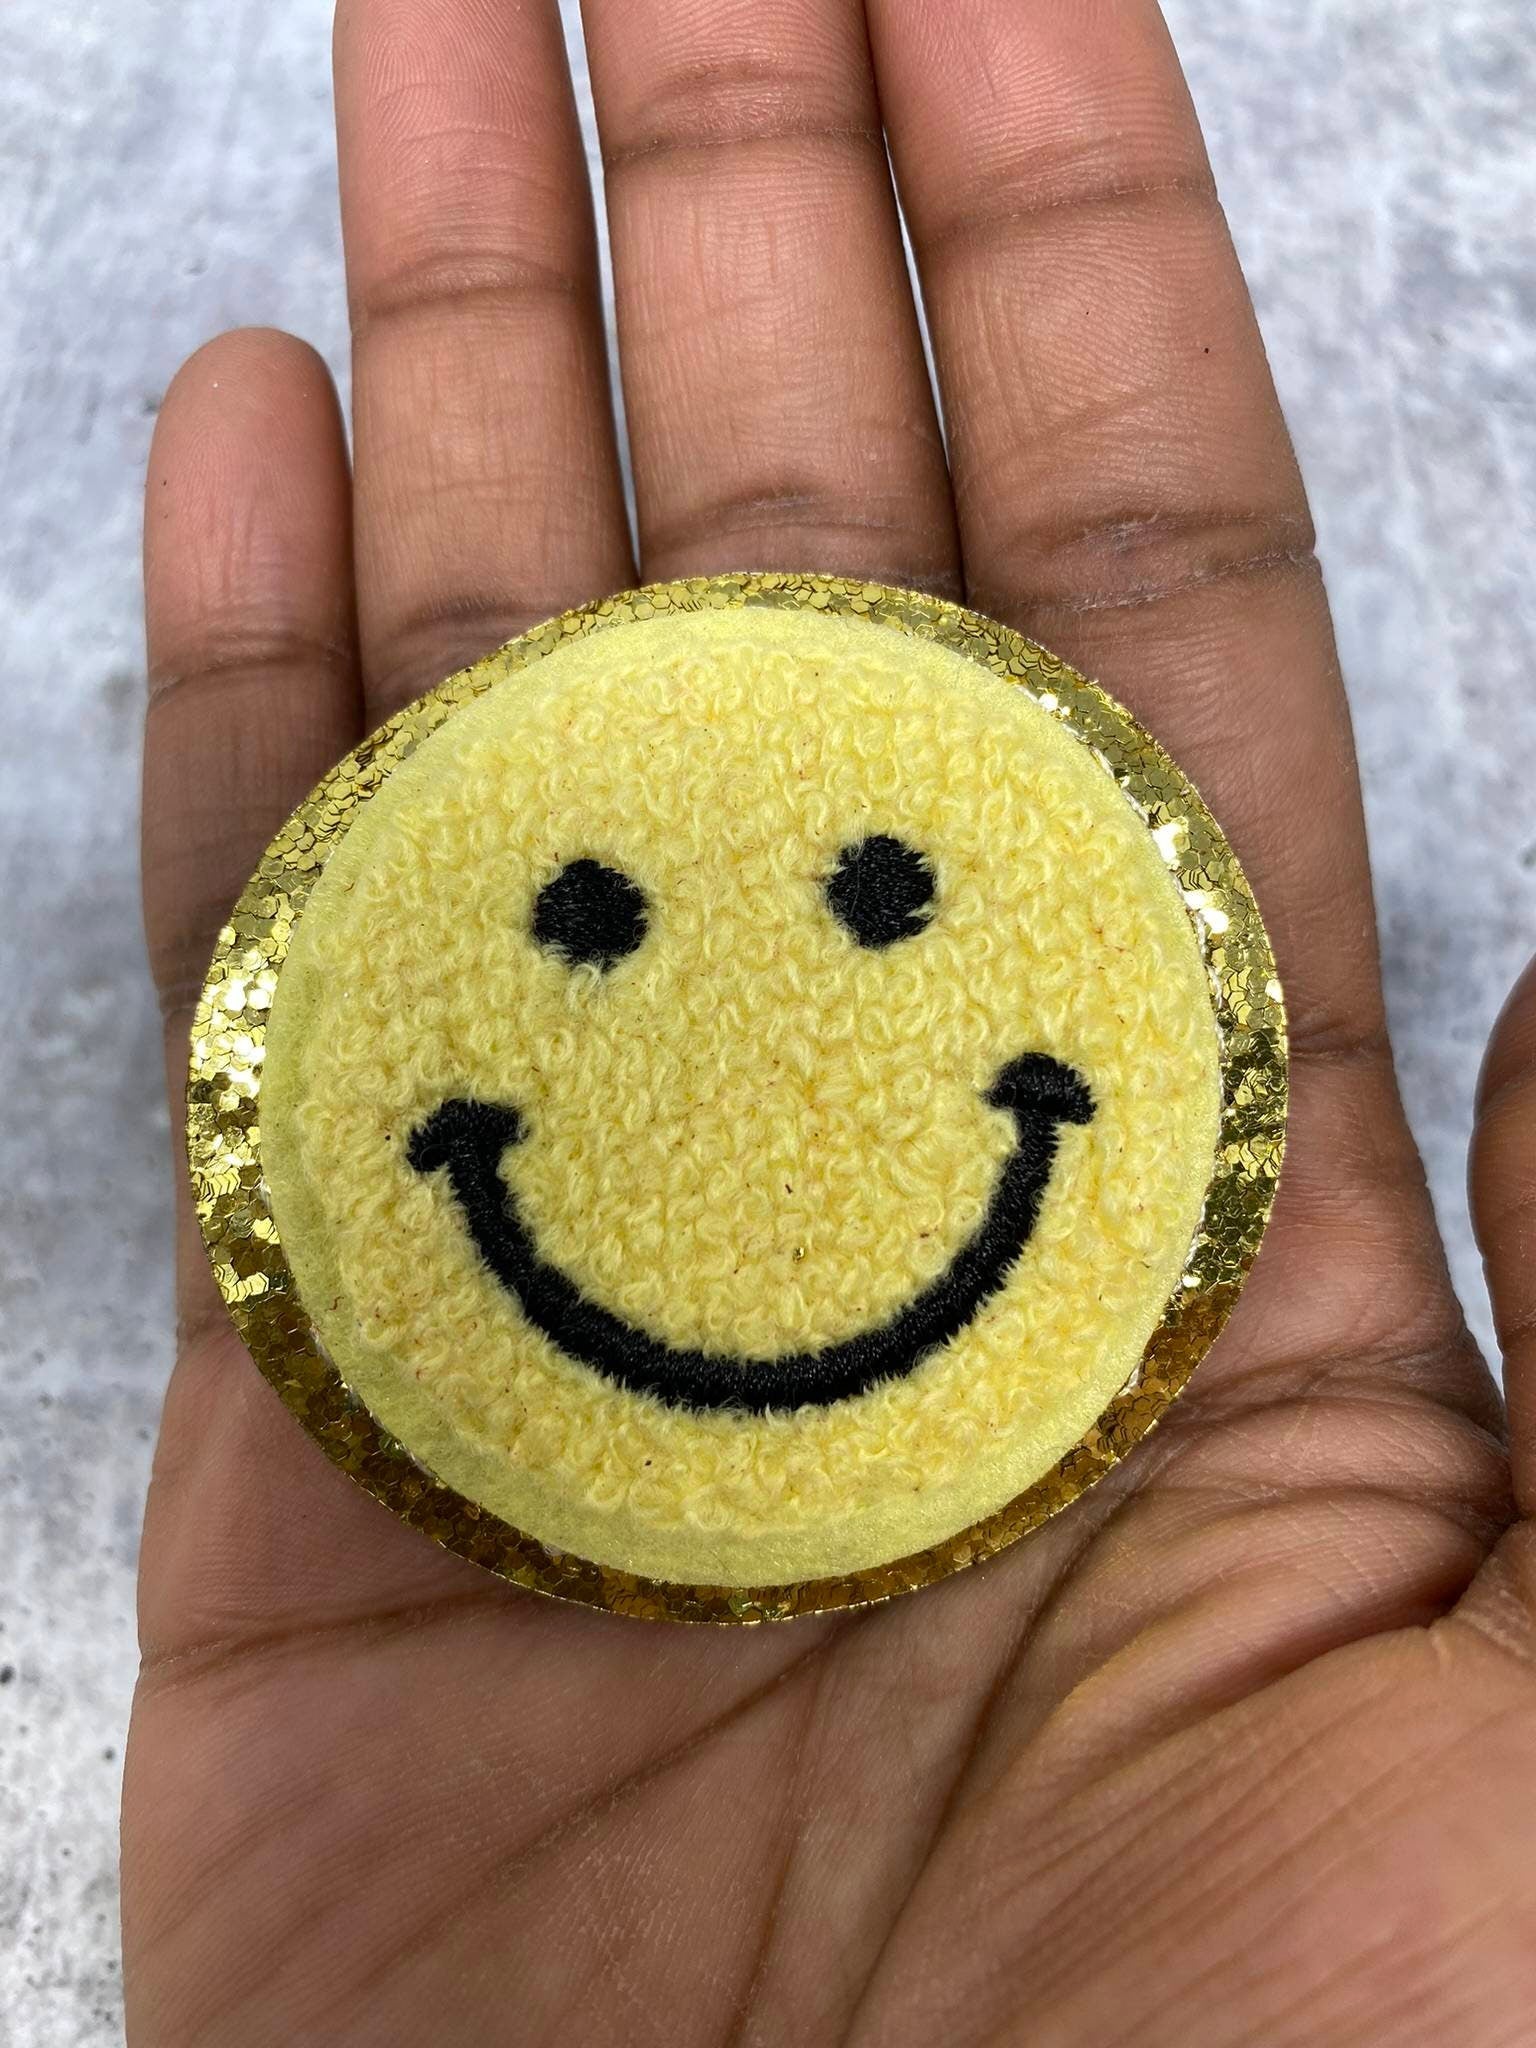 New: Yellow, Chenille "Smile Patch" w/ Gold Glitter, Size 2.5", Smiley Face Patch with Iron-on Backing, Fuzzy Happy Face Applique, Fun Patch